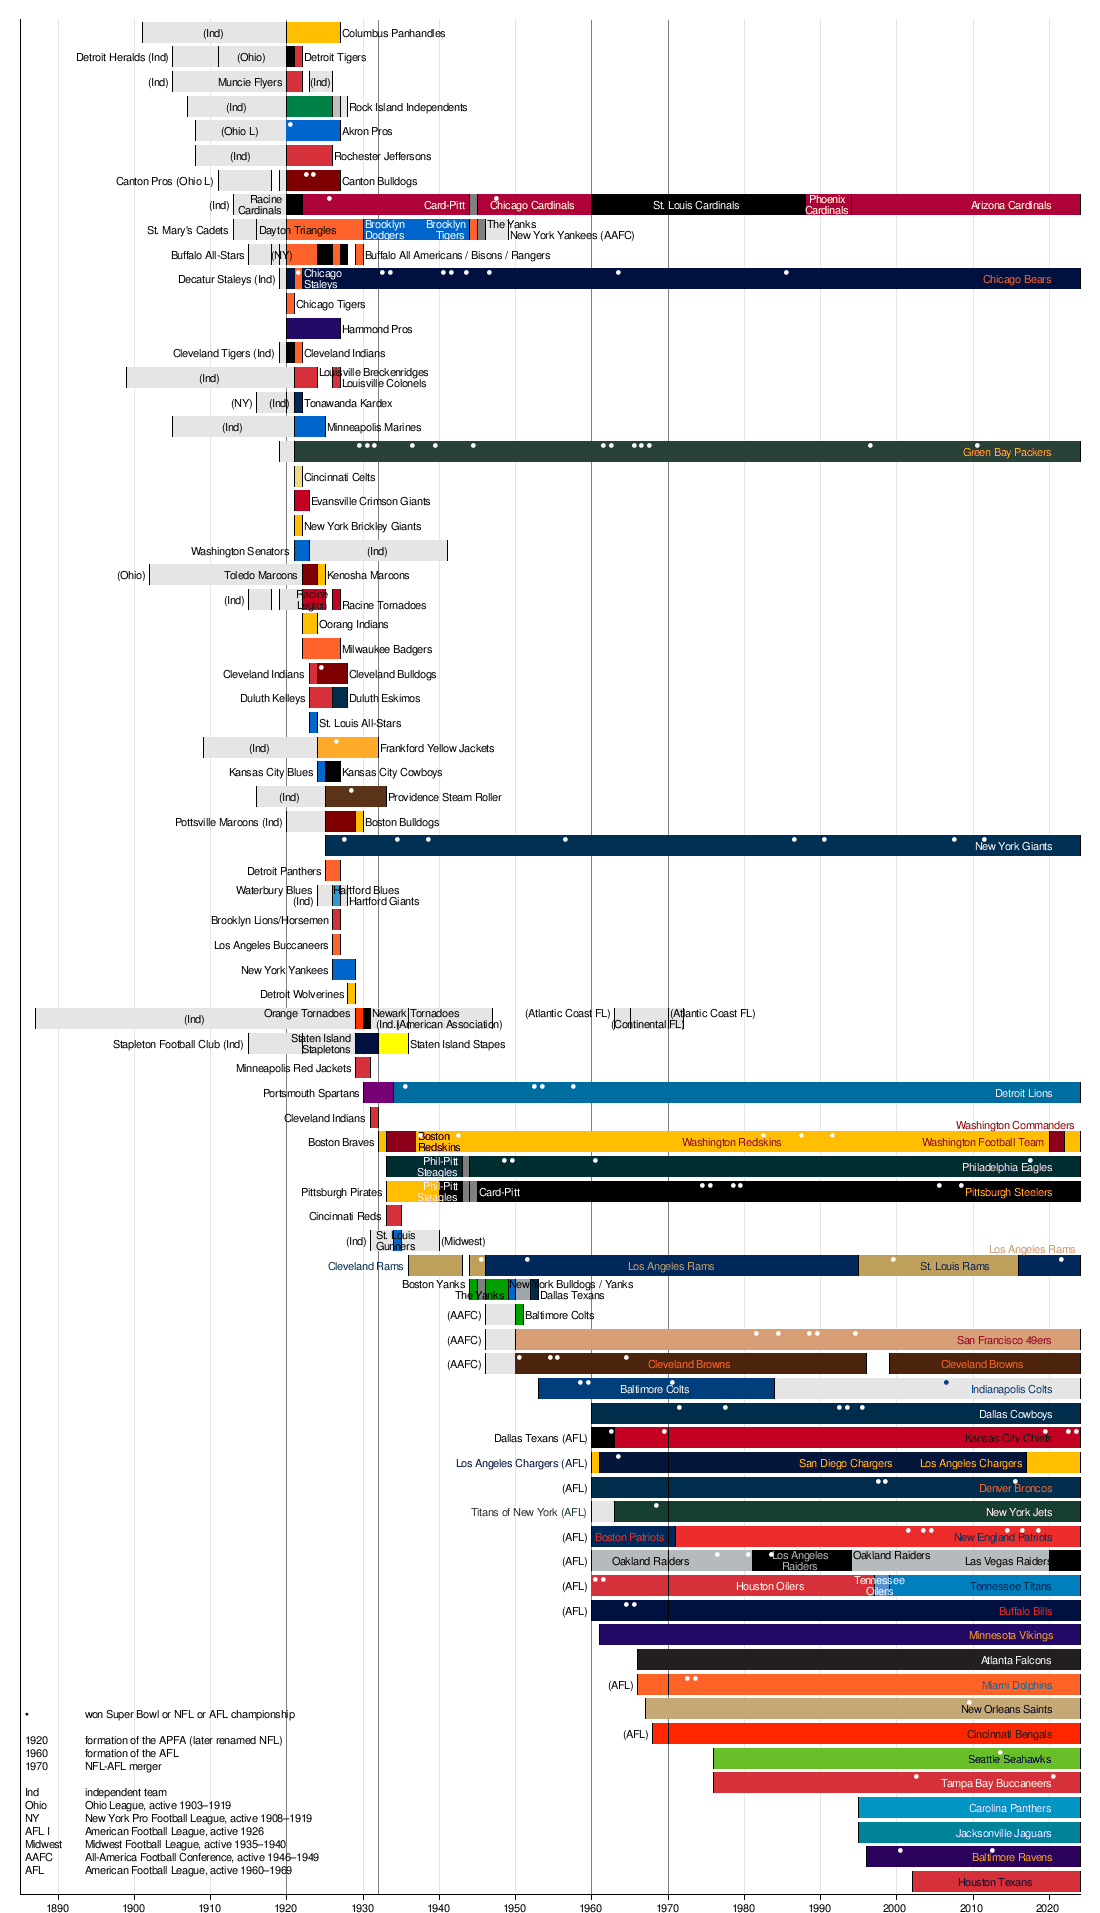 Timeline of the National Football League